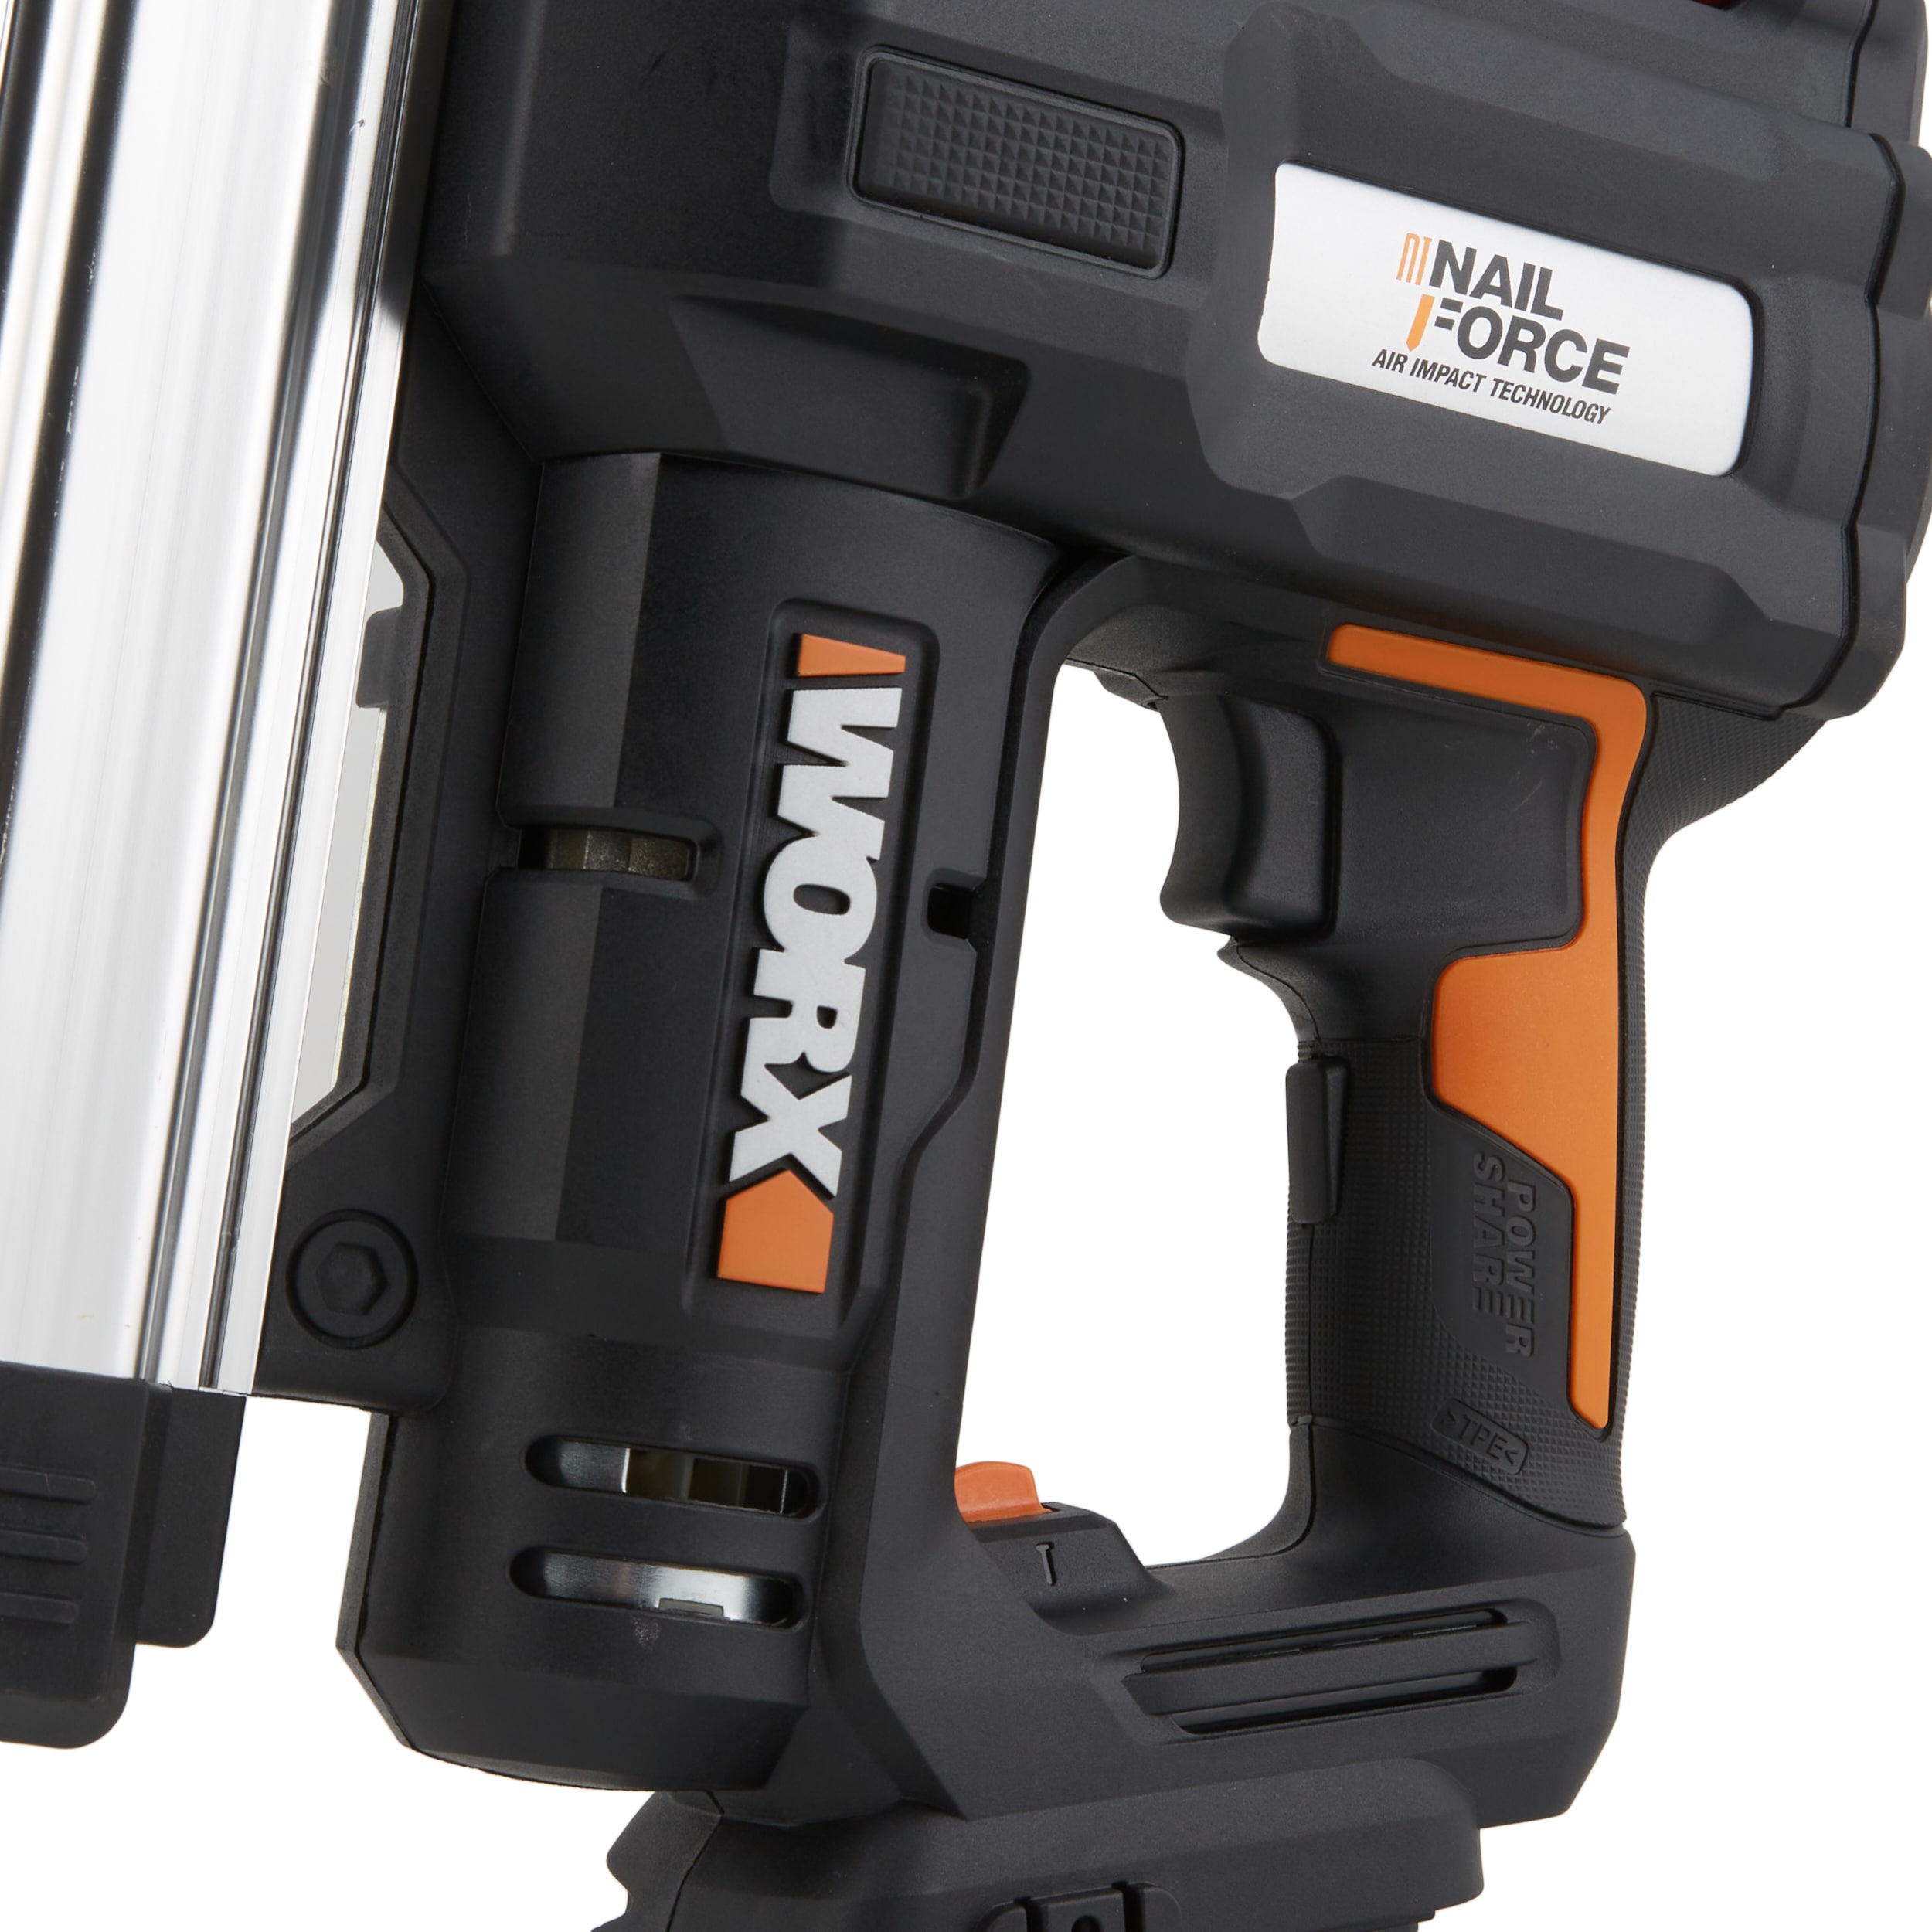 WORX 18 Gauge 2 in. Nitro 20V Power Share Cordless Nail/Staple Gun at  Tractor Supply Co.